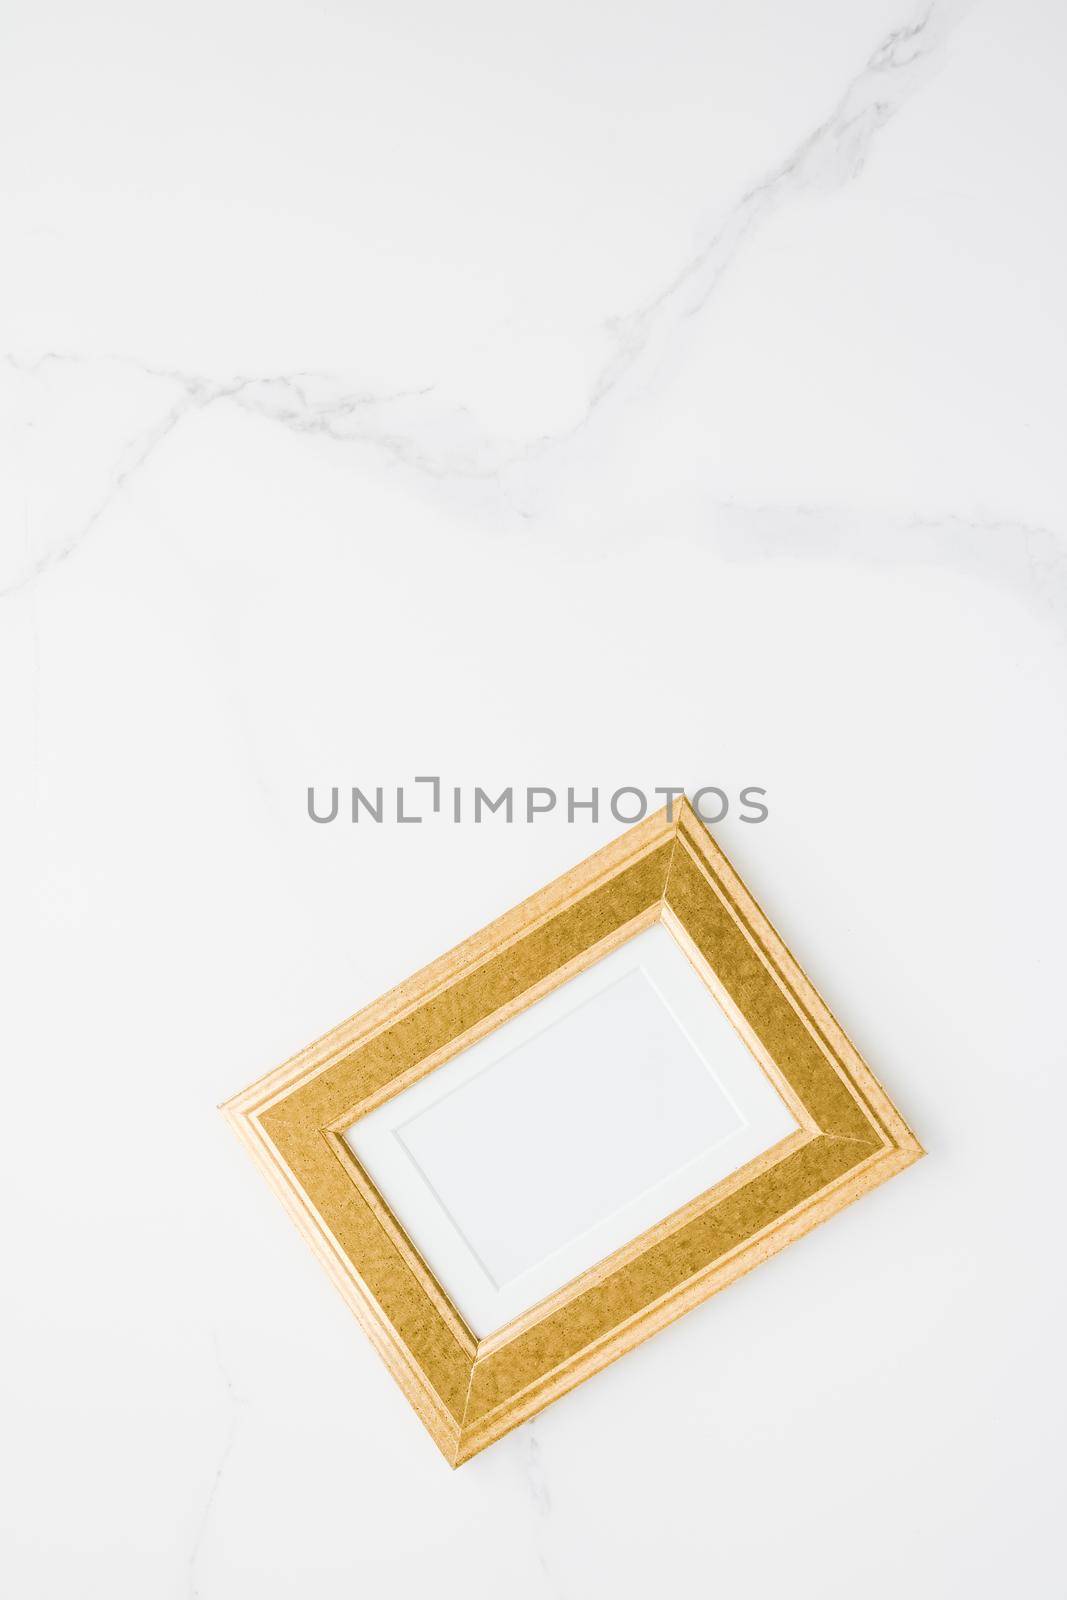 golden photo frame on marble, flatlay mockup - decor and mockup flatlay concept by Anneleven